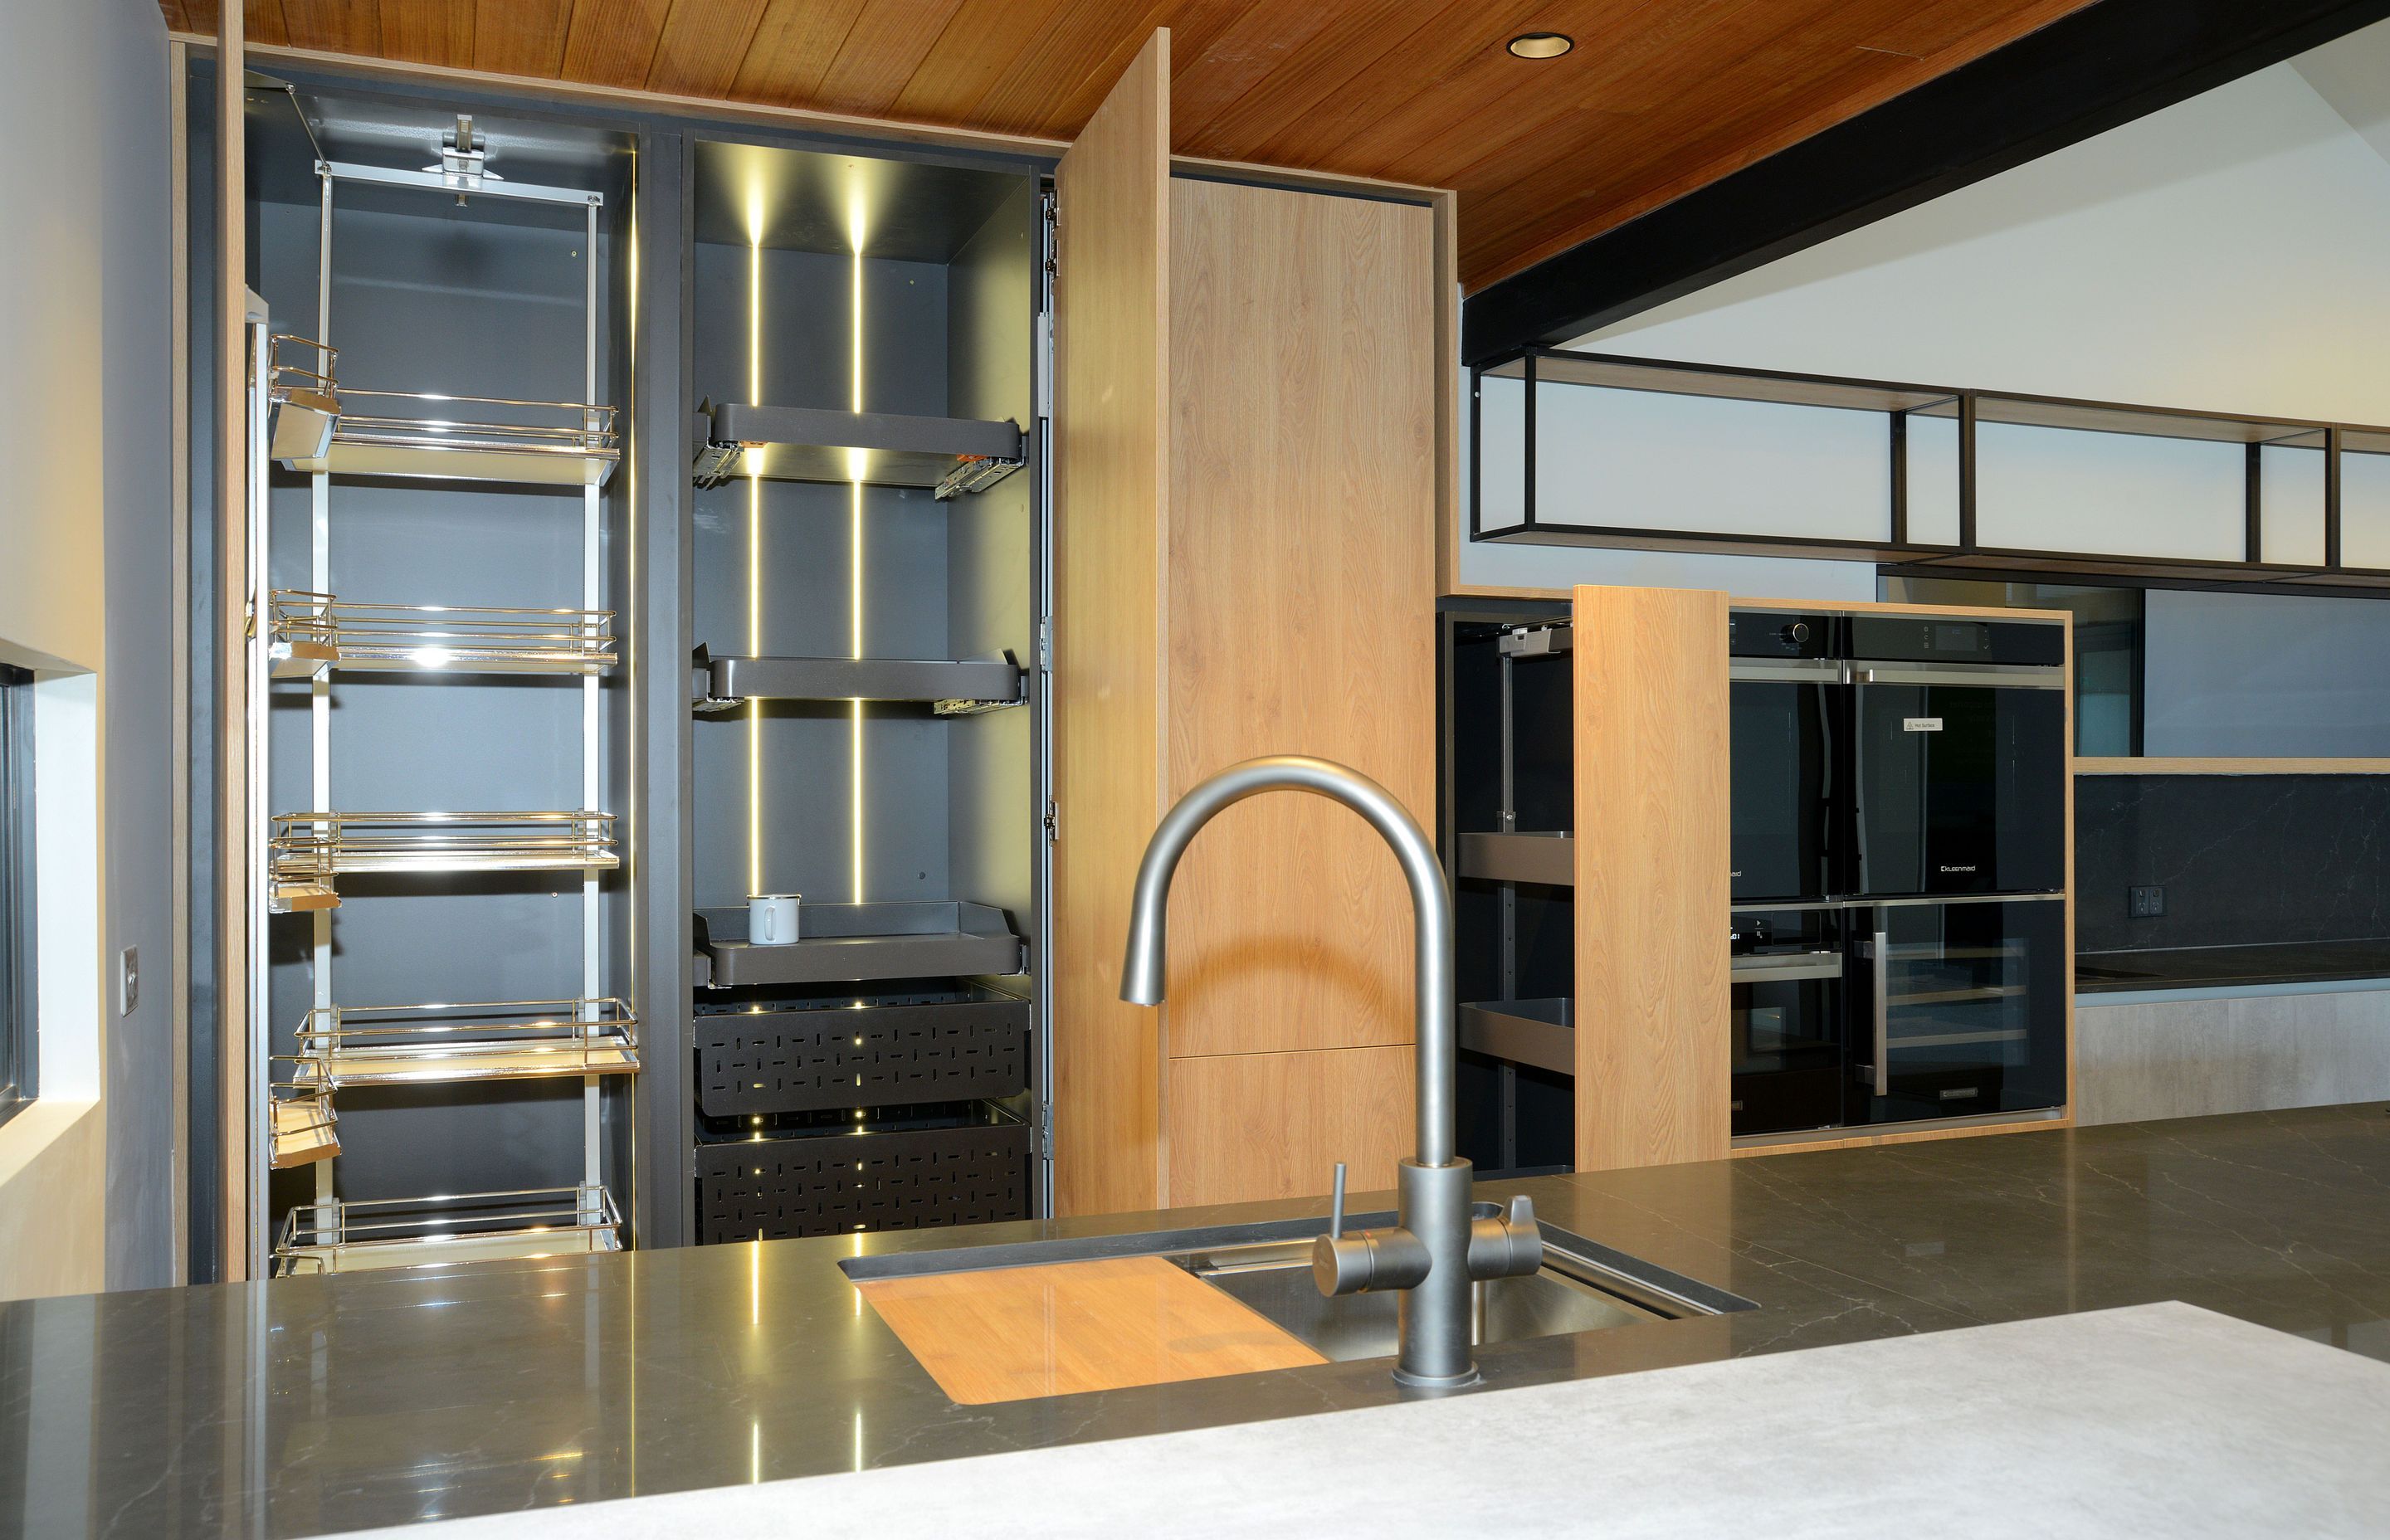 On Left - Vauth Sagel TAL Gate Pro Pantry. On Right - Three Vauth Sagel SUB Baskets in Planero Style Installed with Tanova Ventilated Drawers.